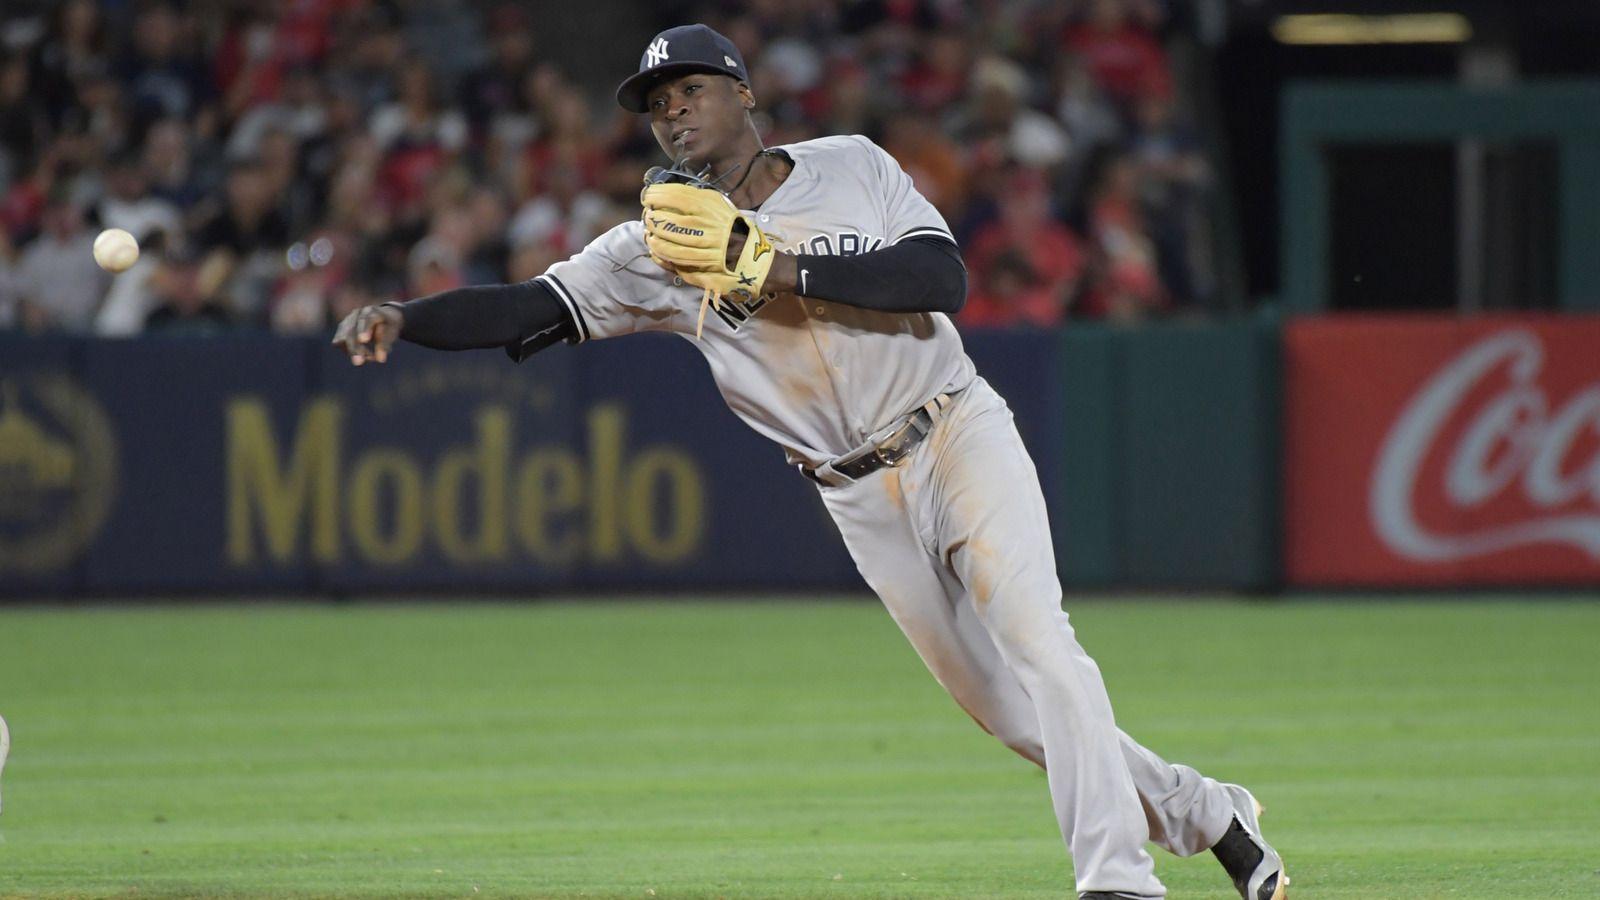 WATCH: Yankees' Didi Gregorius giving out free subway rides in NYC